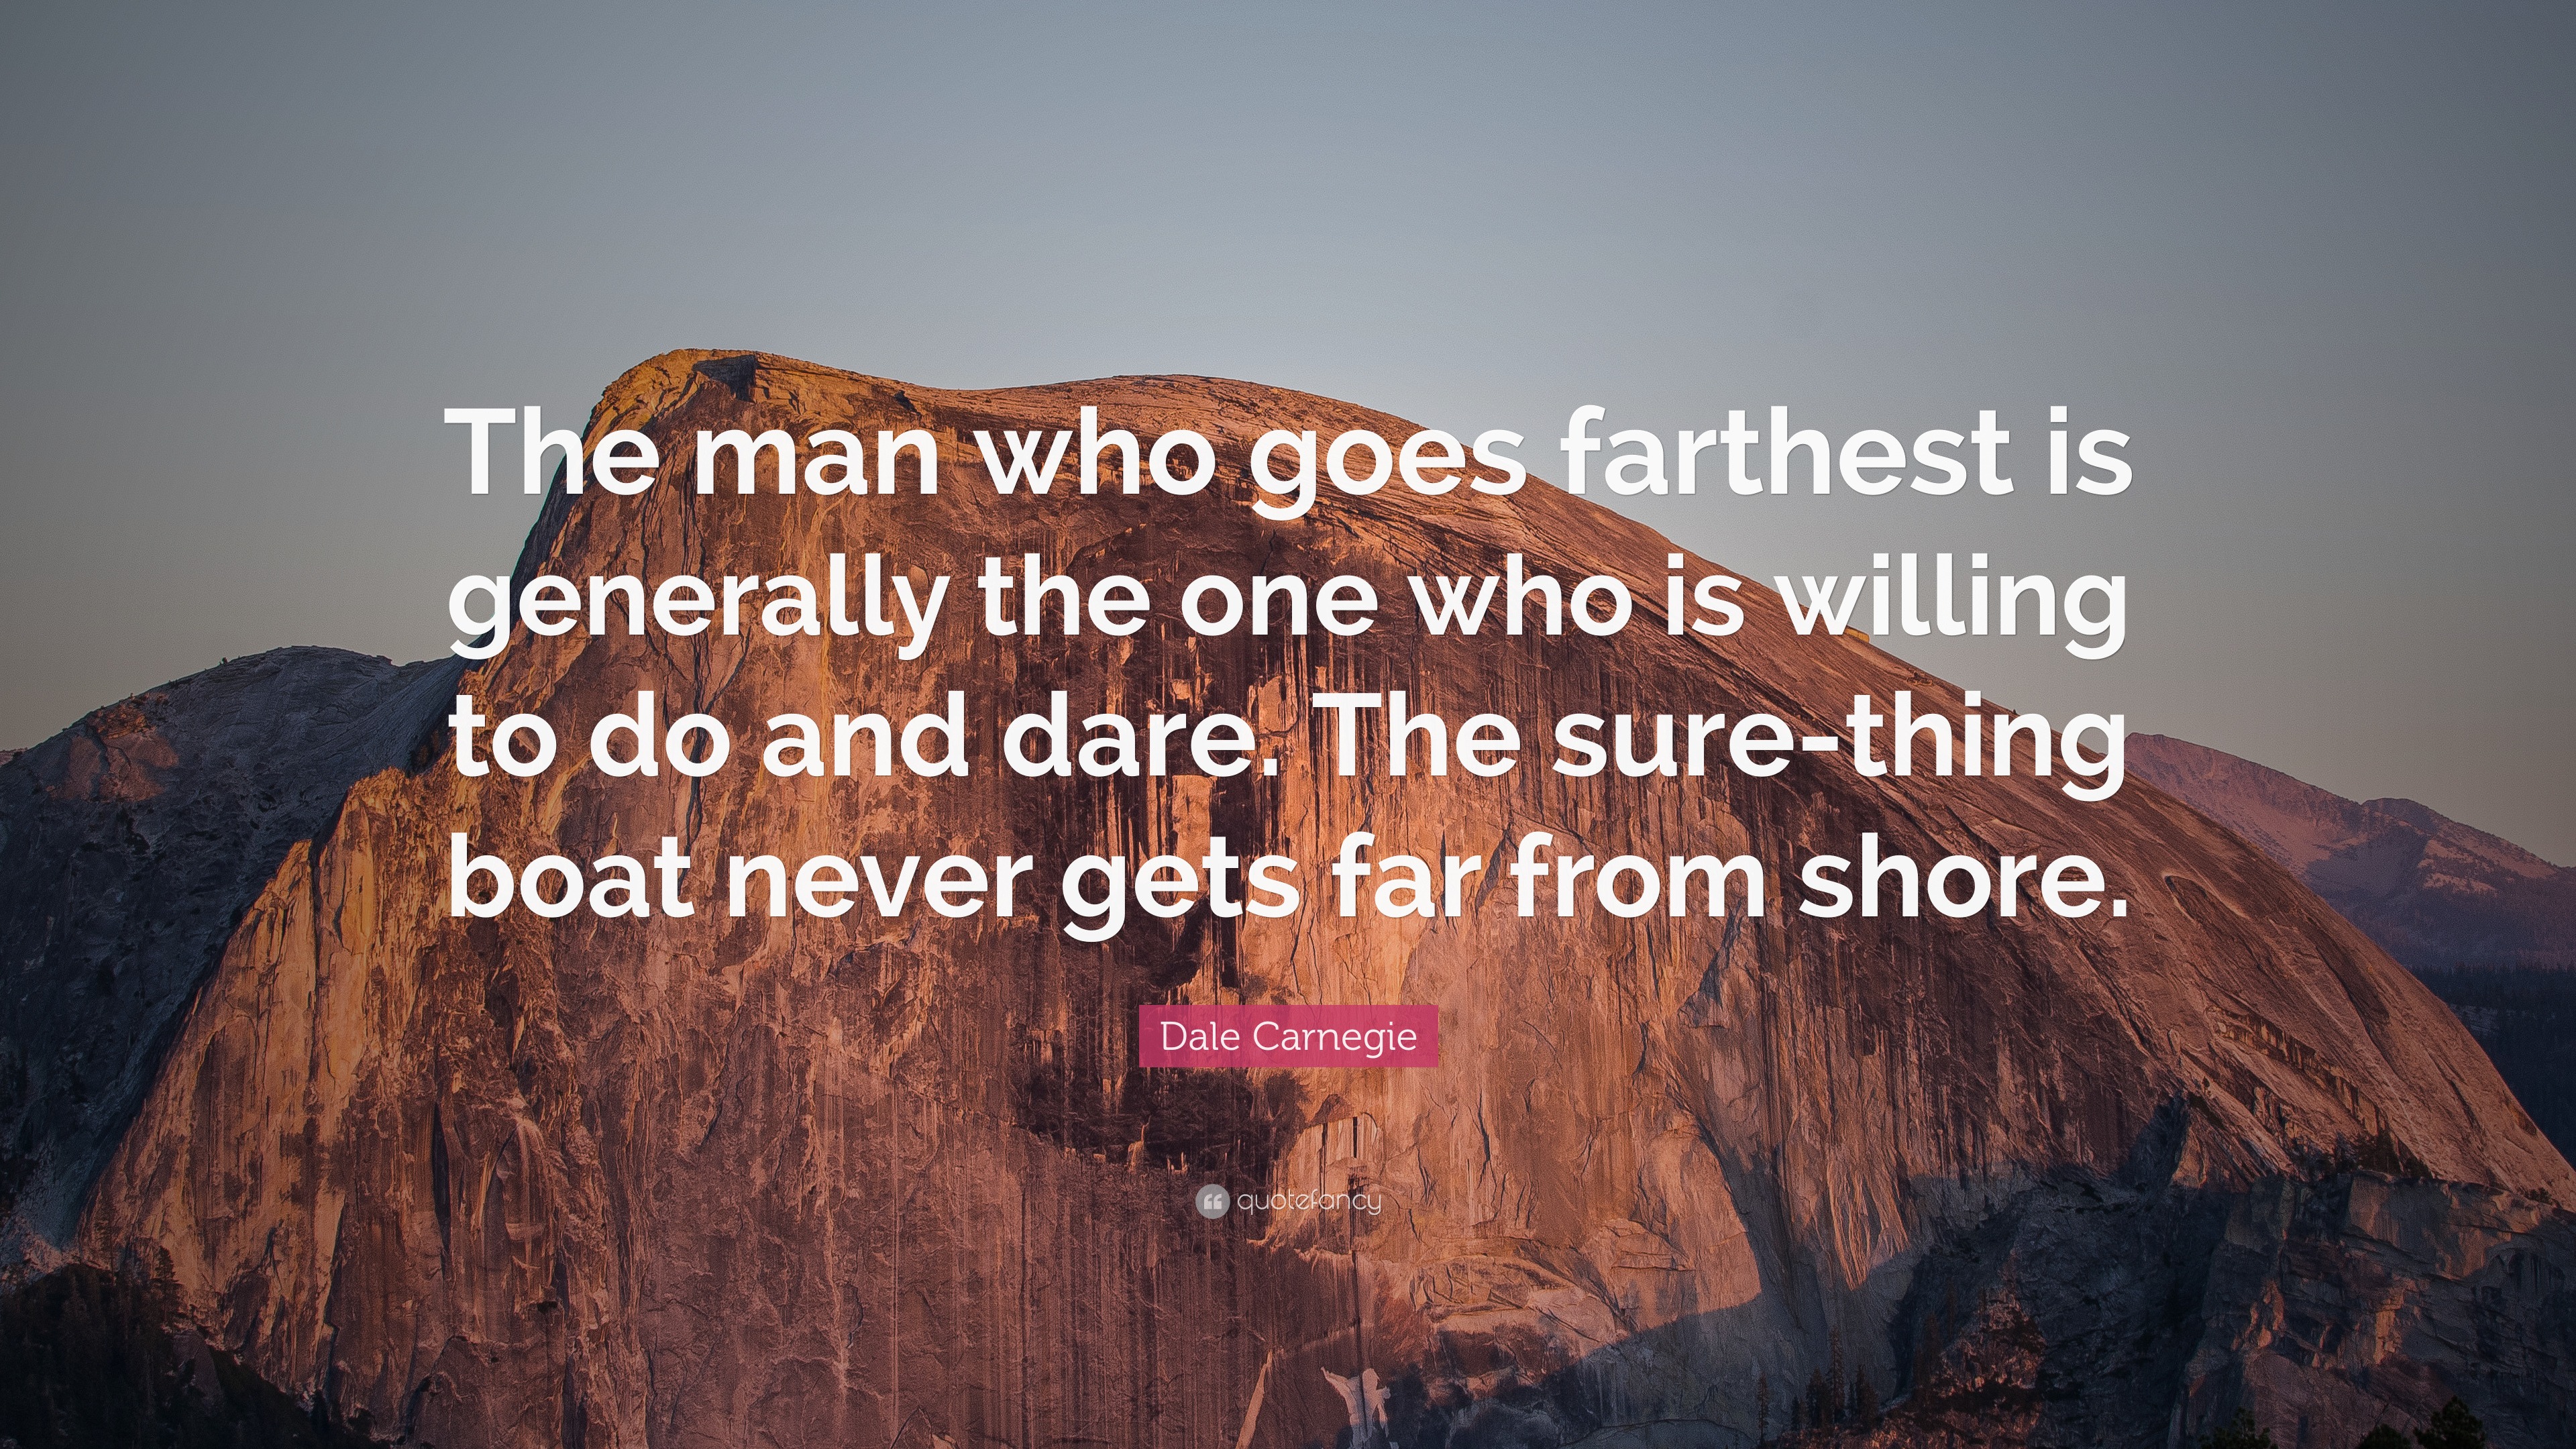 Dale Carnegie Quote: “The man who goes farthest is generally the